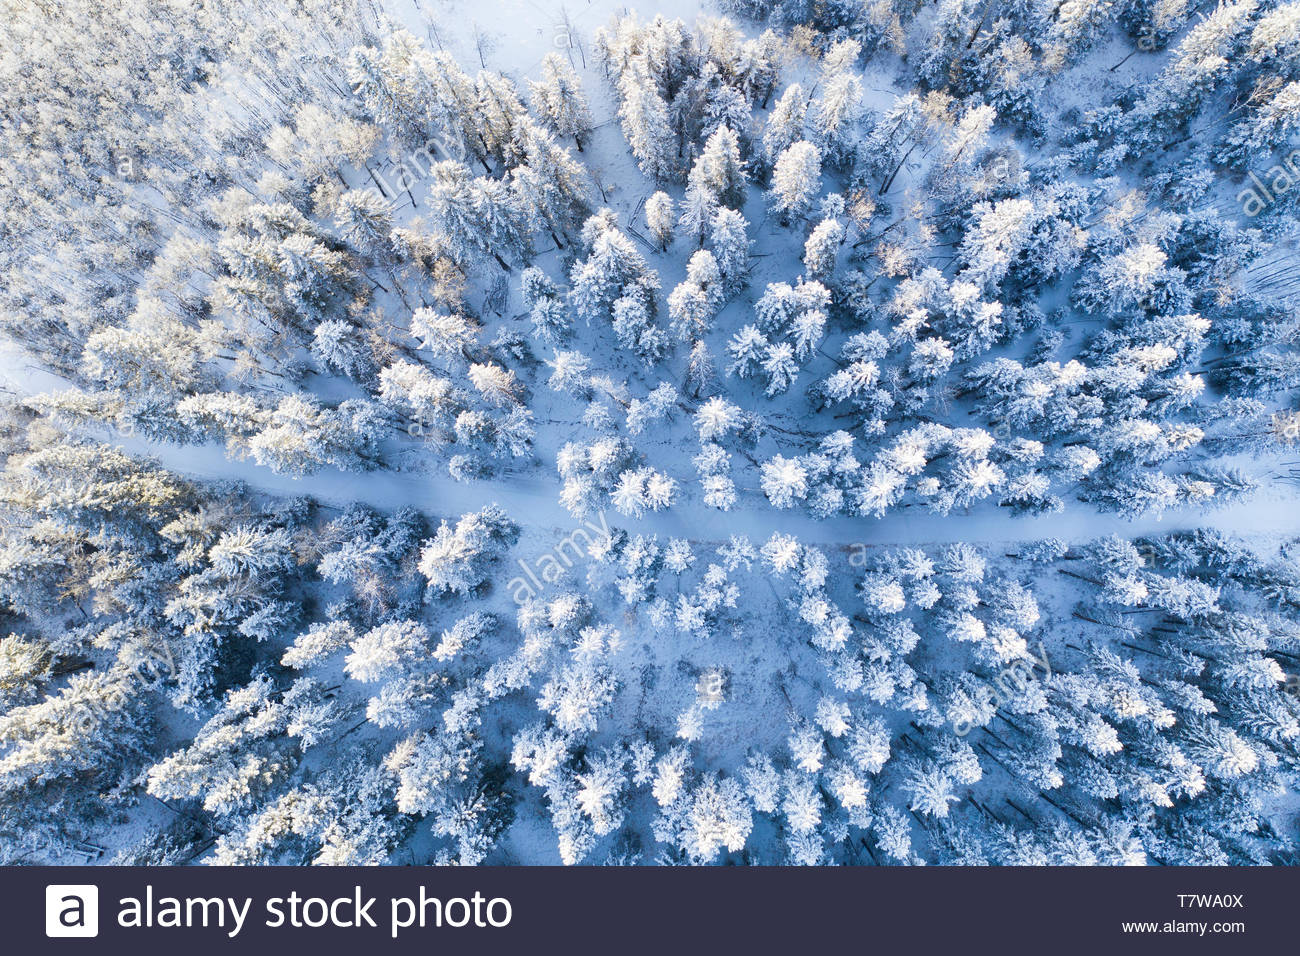 Drone point of view snow covered treetops in forest, Alberta, Canada Stock Photo